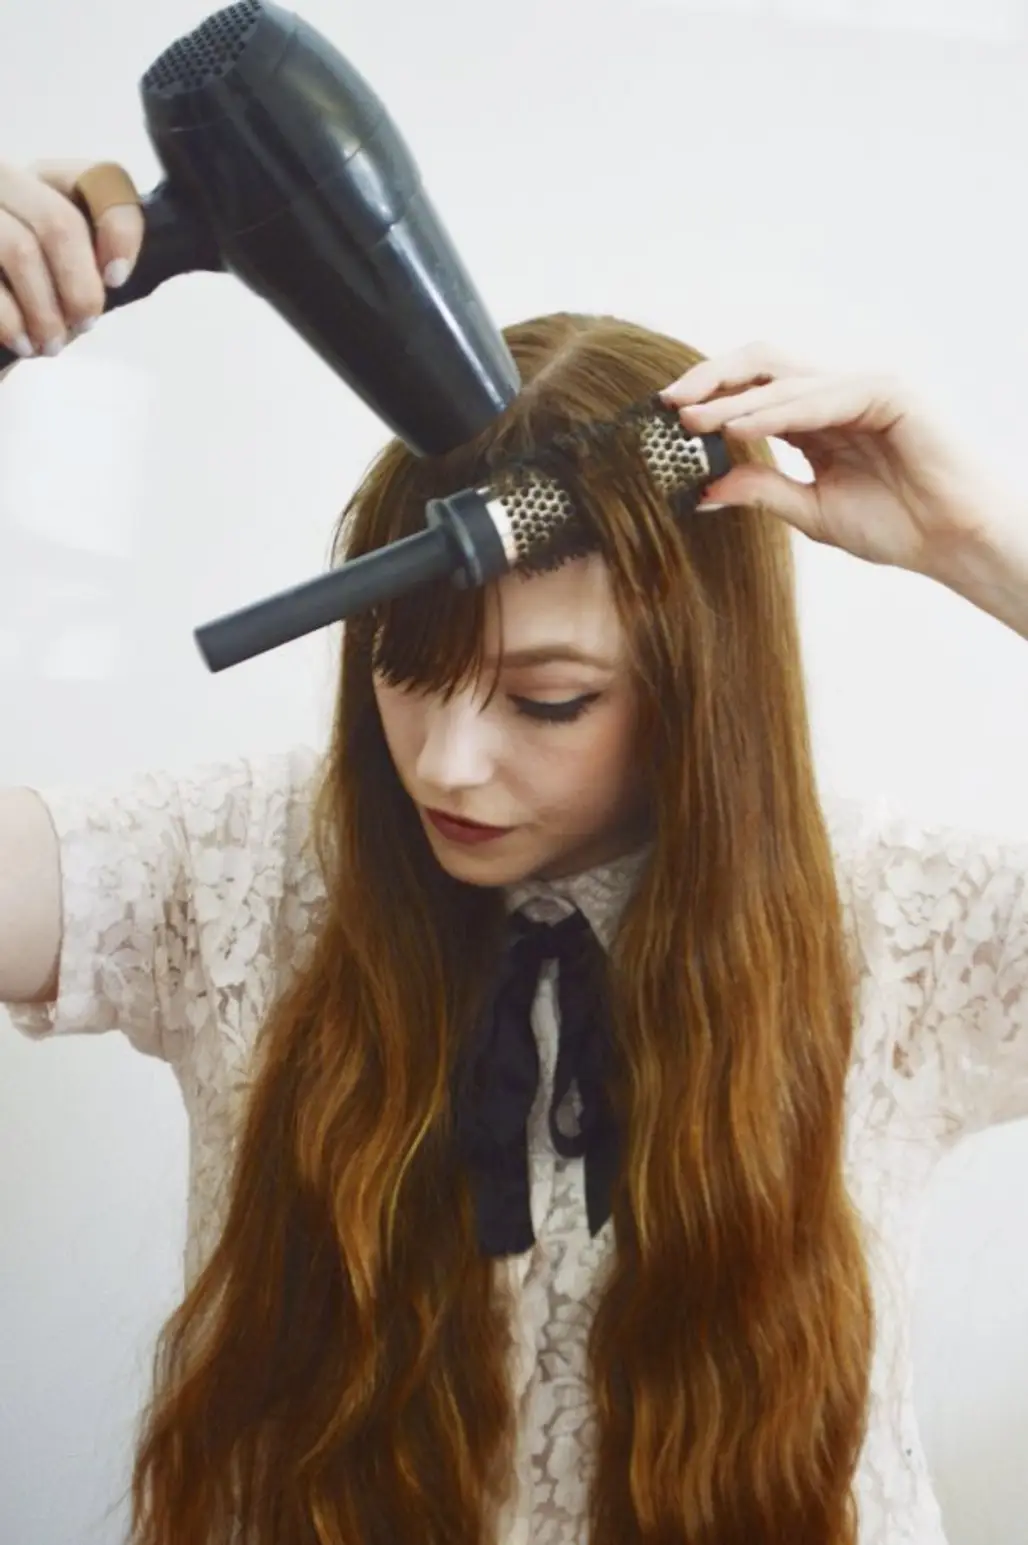 Use the Right Blow Dryer